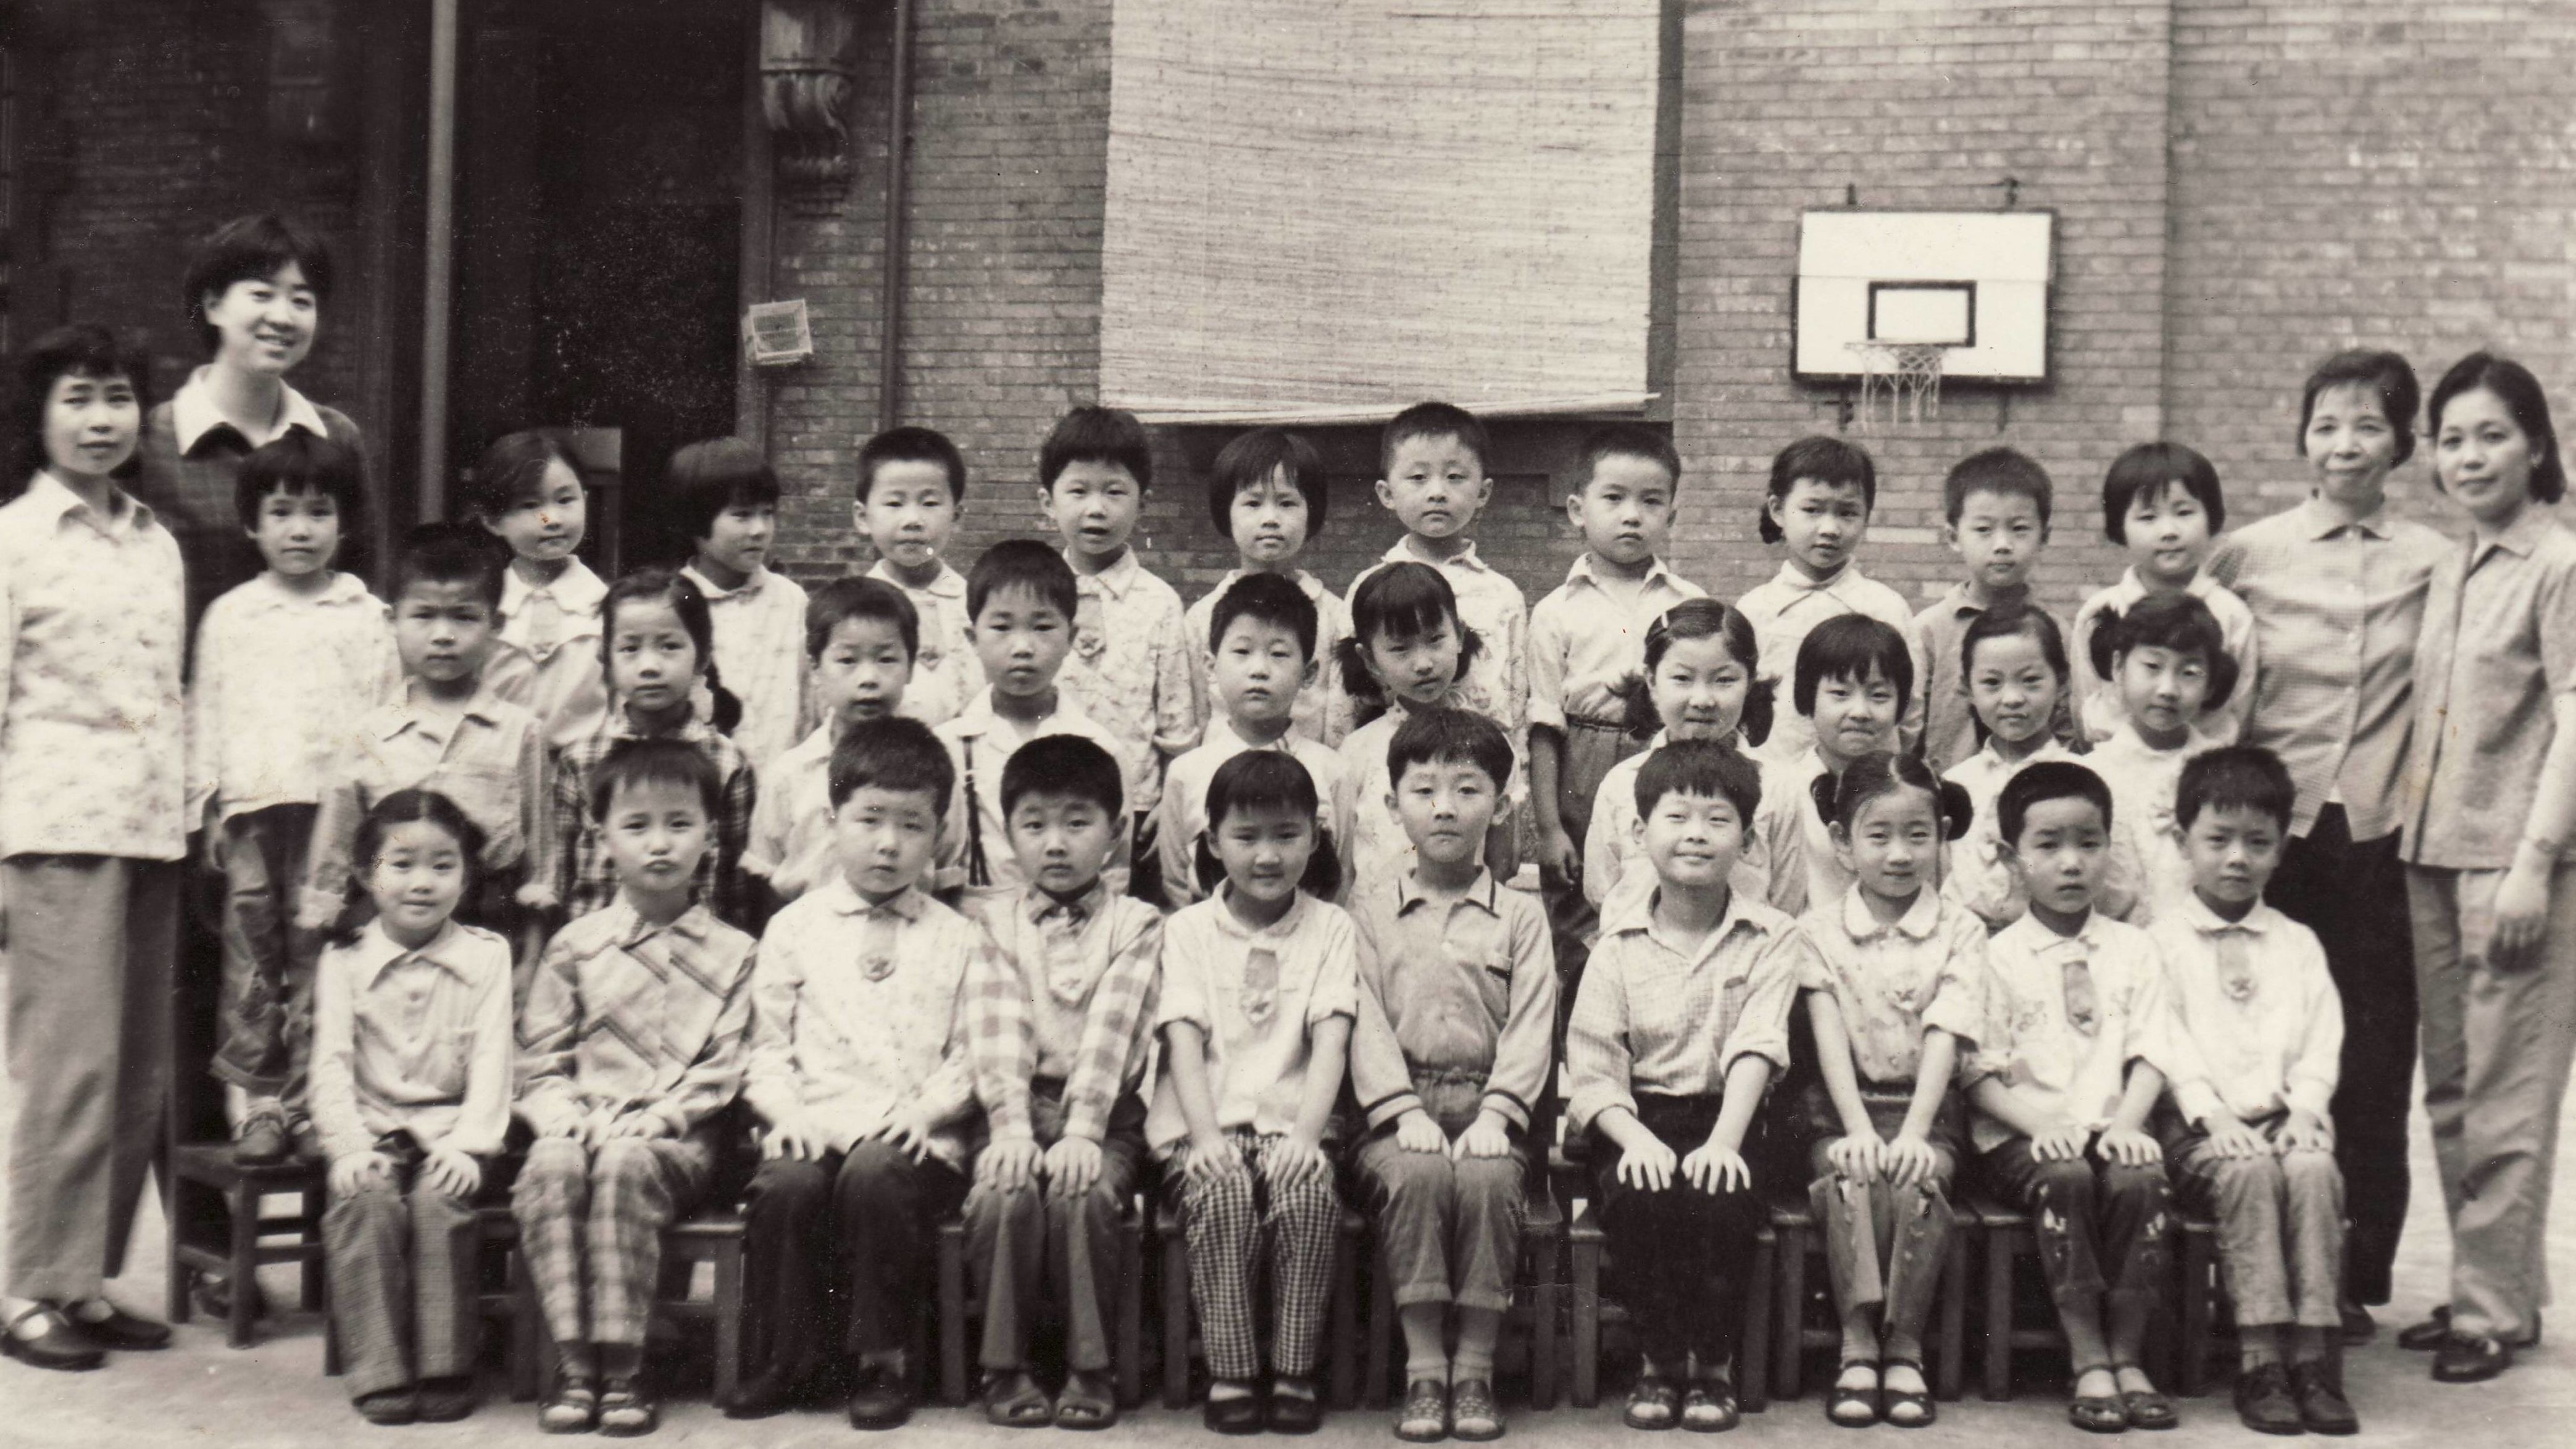 CNN's Steven Jiang, aged 6 in a school photo in 1982. Most of his classmates were also only children. He is front row, third from left.